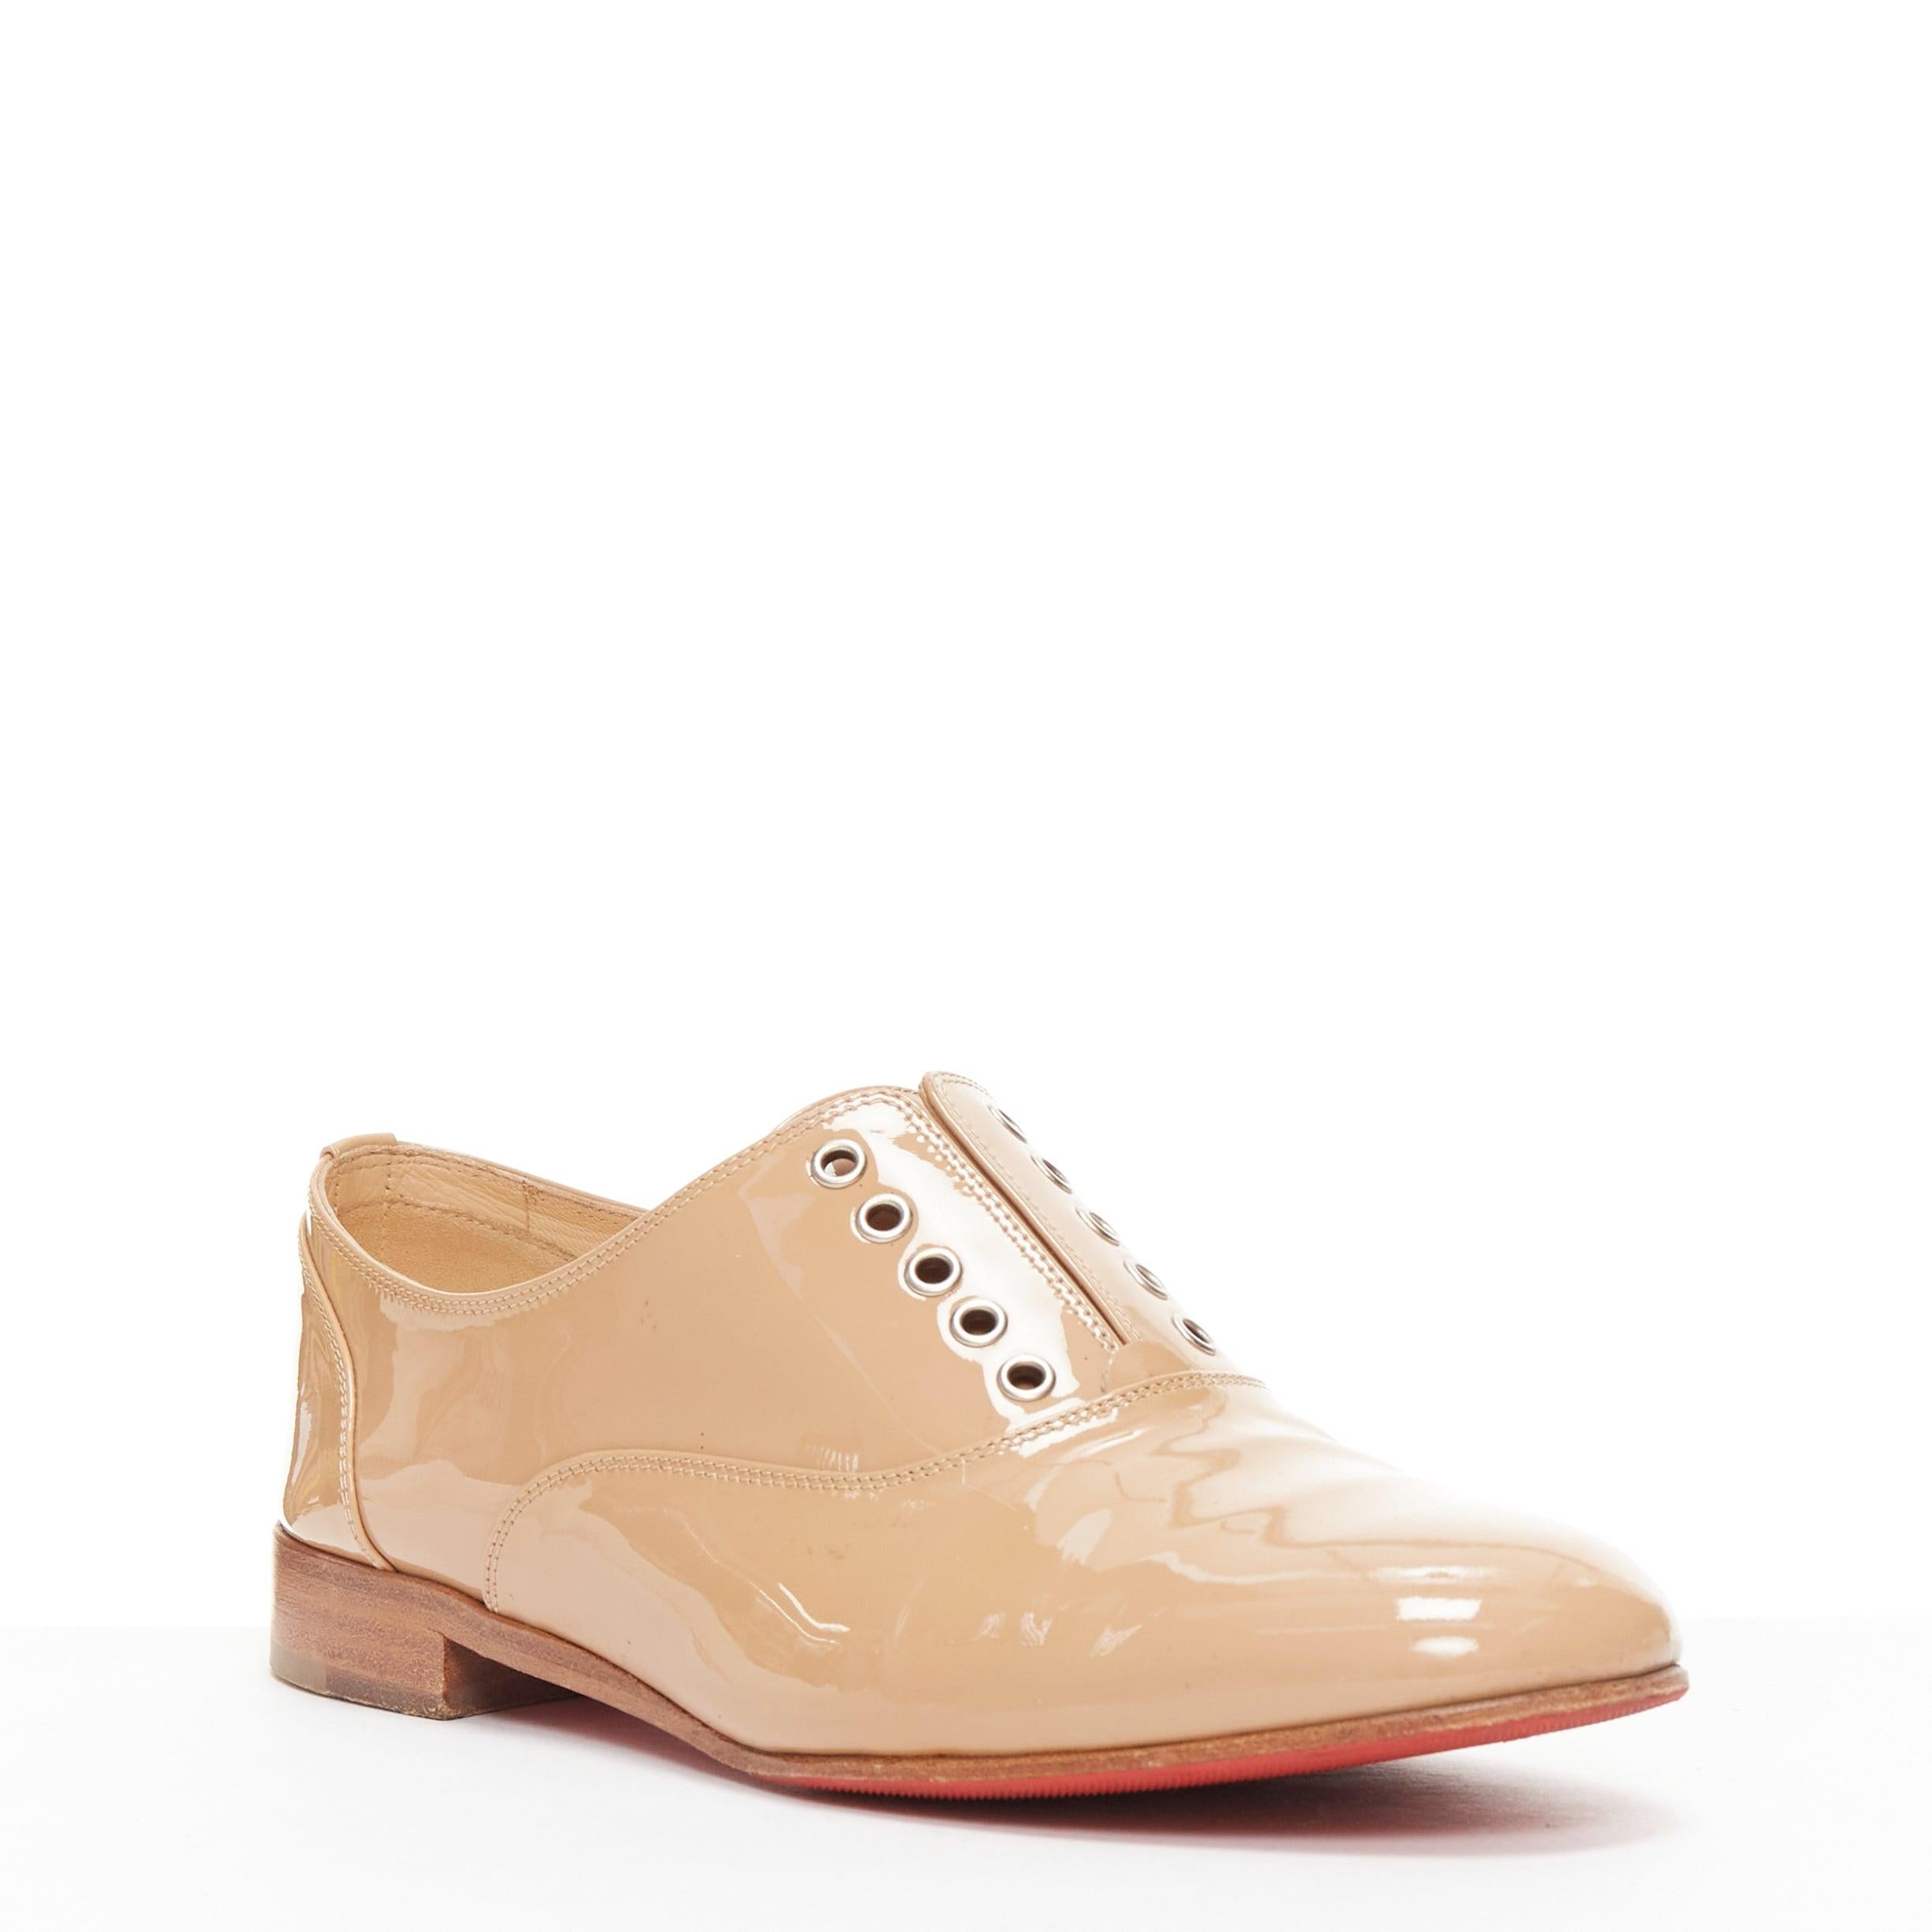 CHRISTIAN LOUBOUTIN beige patent leather round toe derby flat shoes EU35.5
Reference: YIKK/A00081
Brand: Christian Louboutin
Material: Leather
Color: Nude, Silver
Pattern: Solid
Closure: Lace Up
Lining: Nude Leather
Extra Details: Does not come with